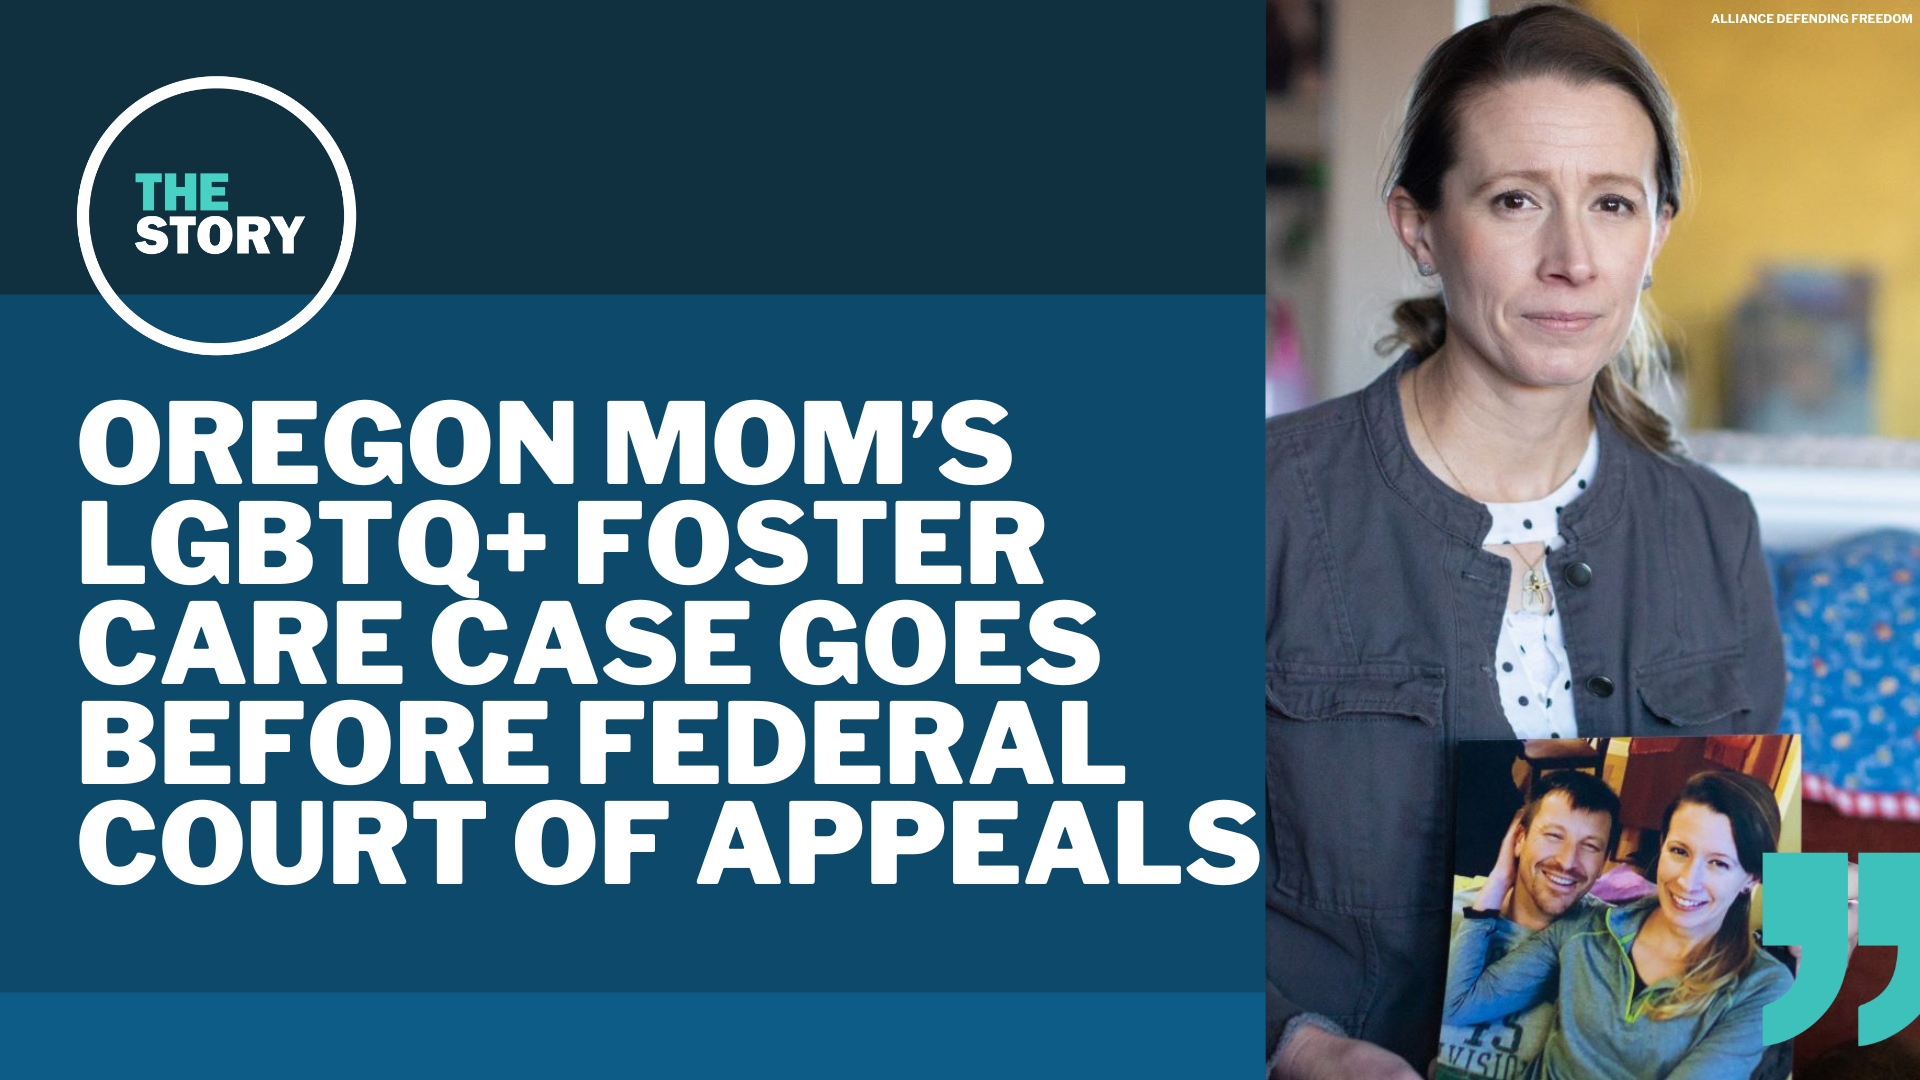 Jessica Bates sought to become a foster parent, but the state denied her certification because she told them she would refuse to support LGBTQ kids in her care.